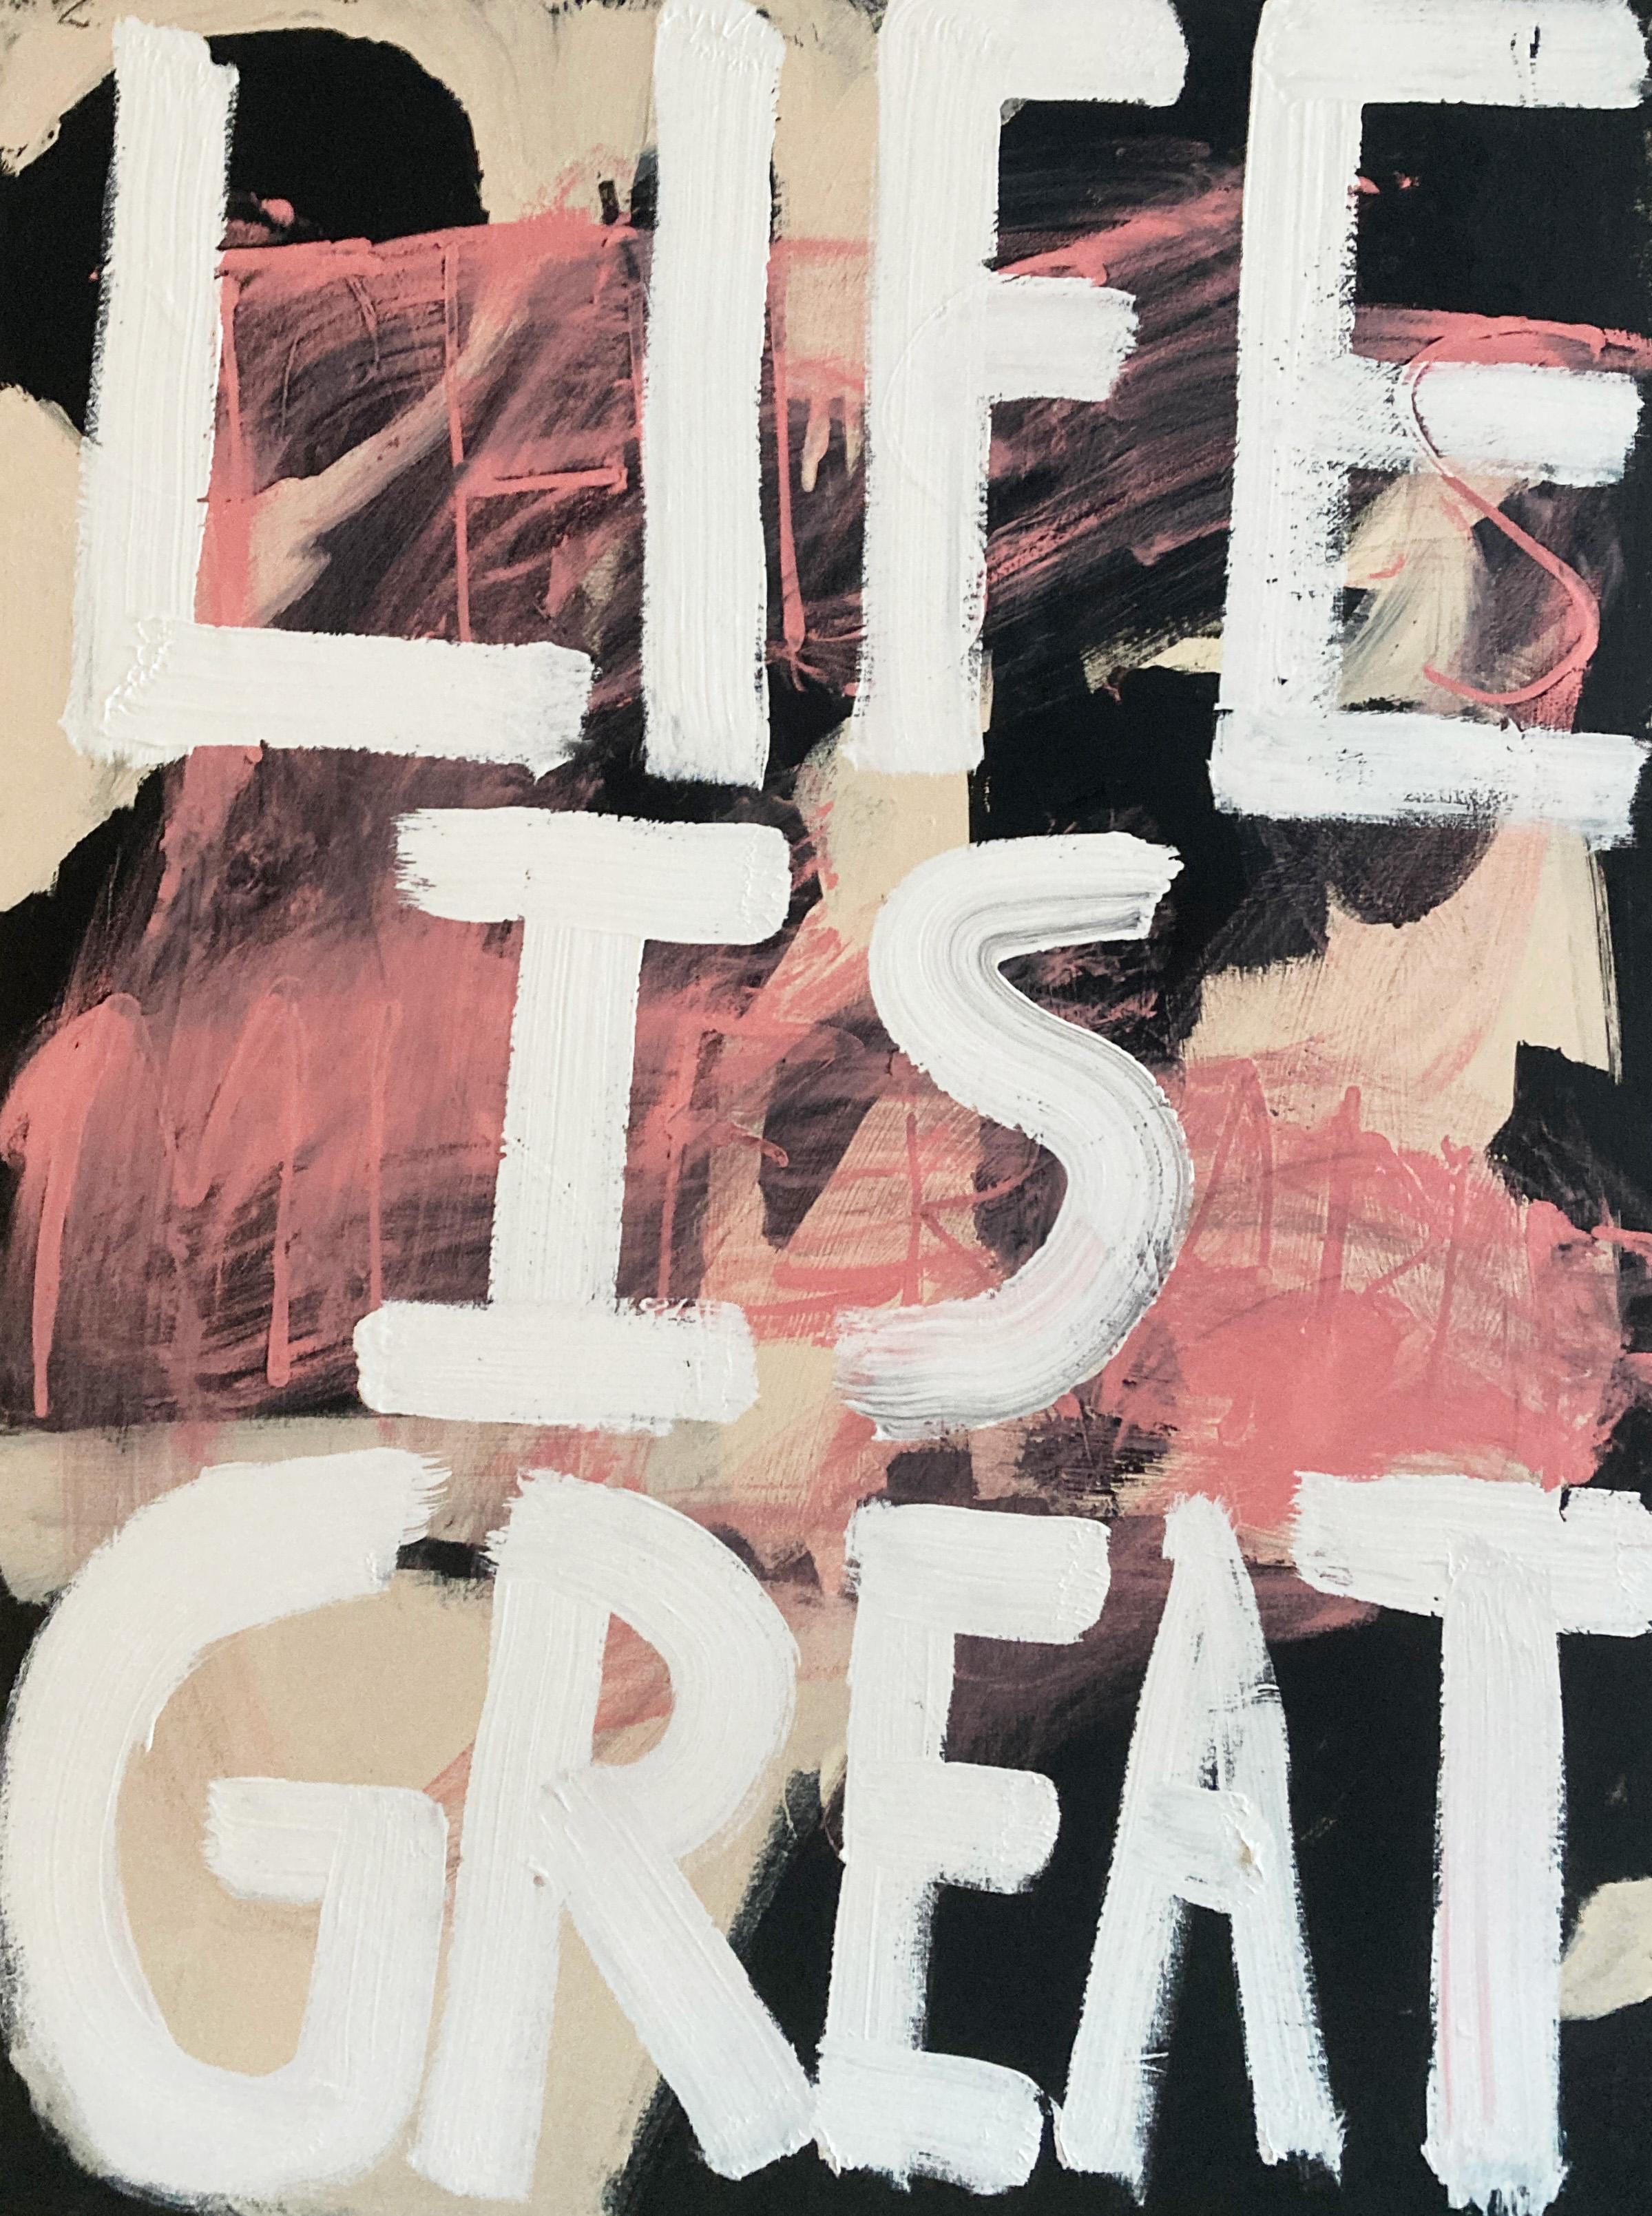 Life Is Great, Contemporary Text Painting by Matt Higgins